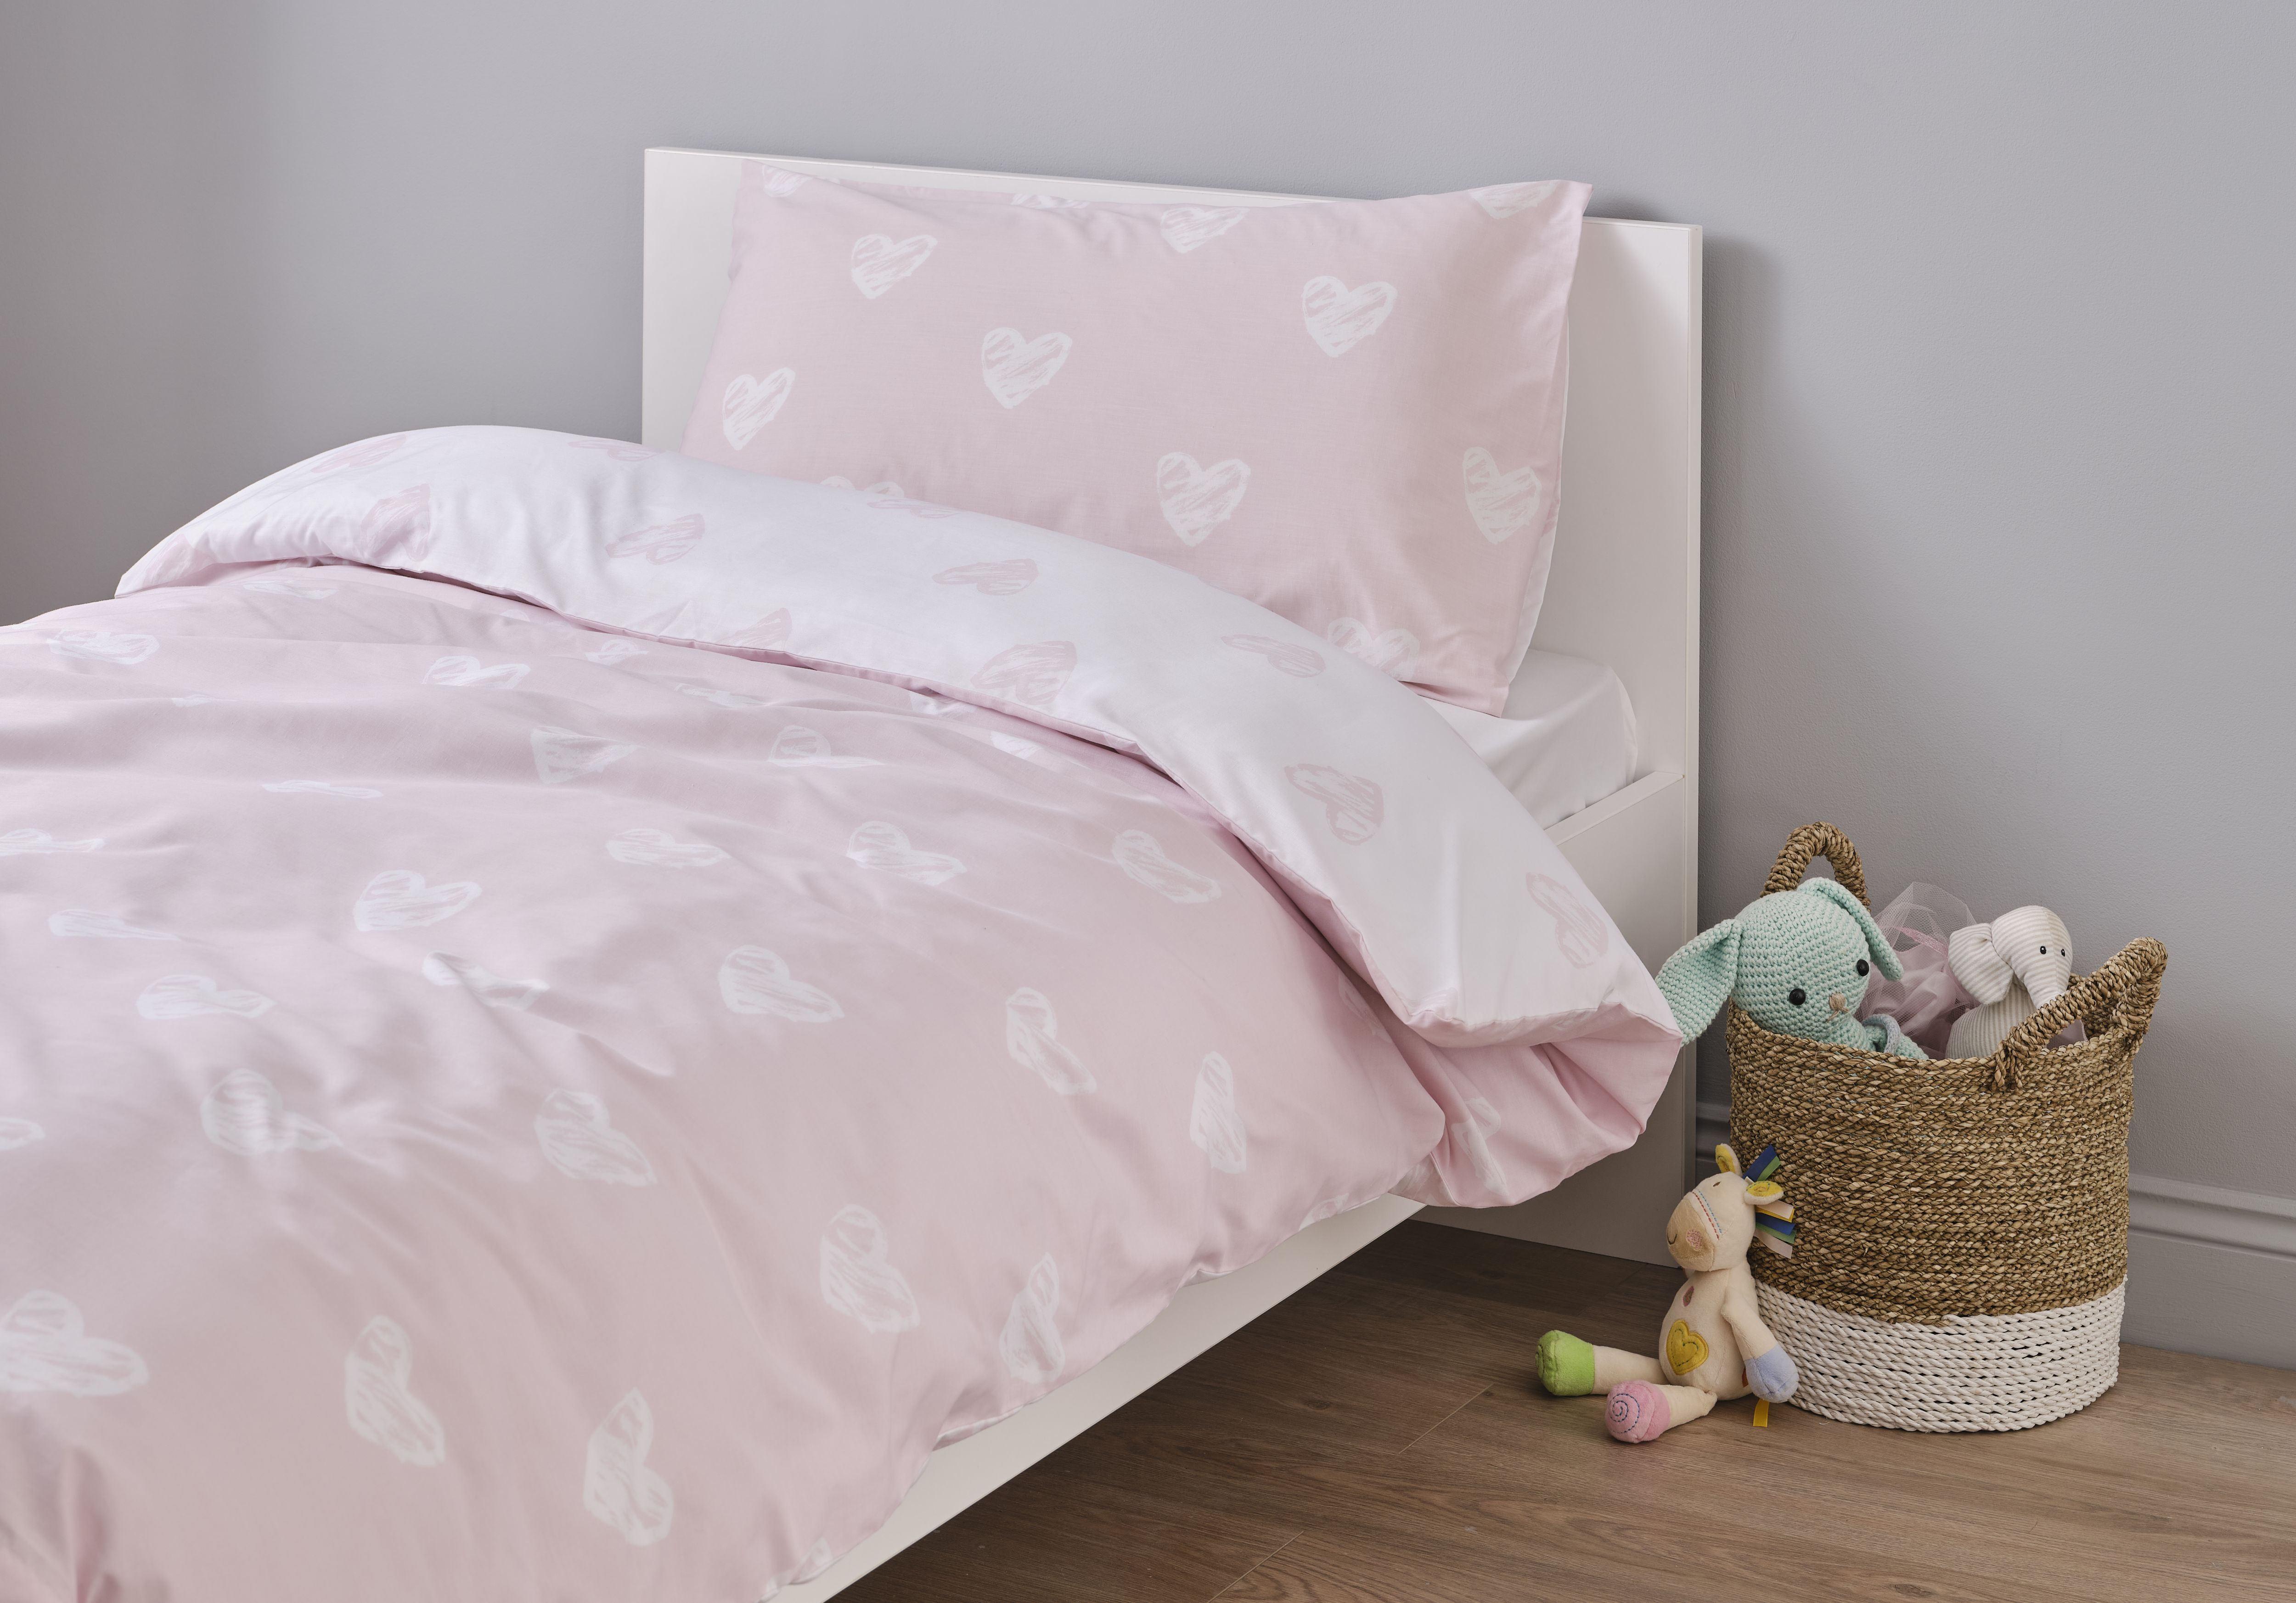 Squiggle Heart Pink & white Single Duvet cover & pillow case set